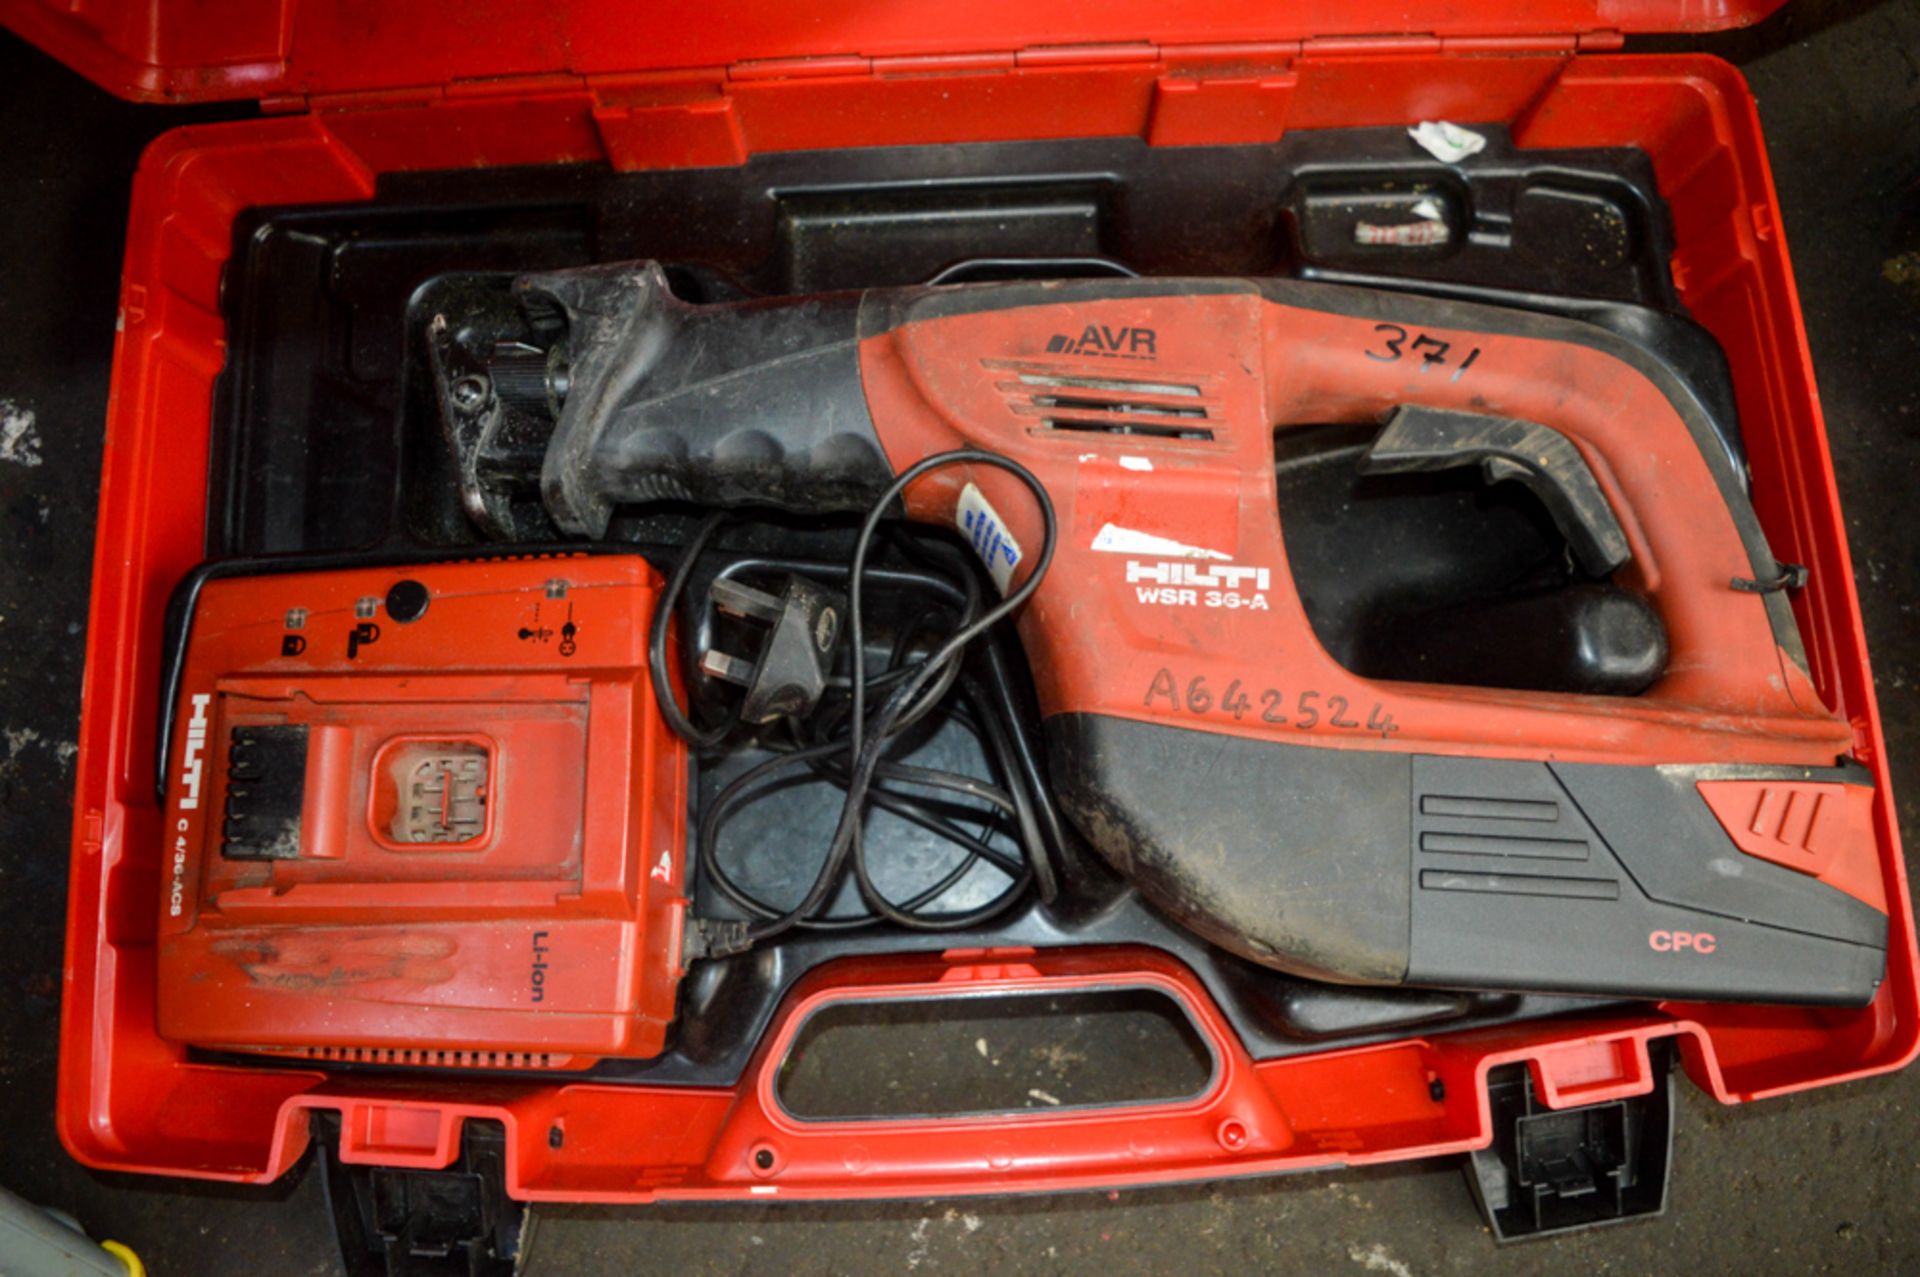 Hilti WSR 36-A 36 volt cordless reciprocating saw c/w battery, charger & carry case A642524